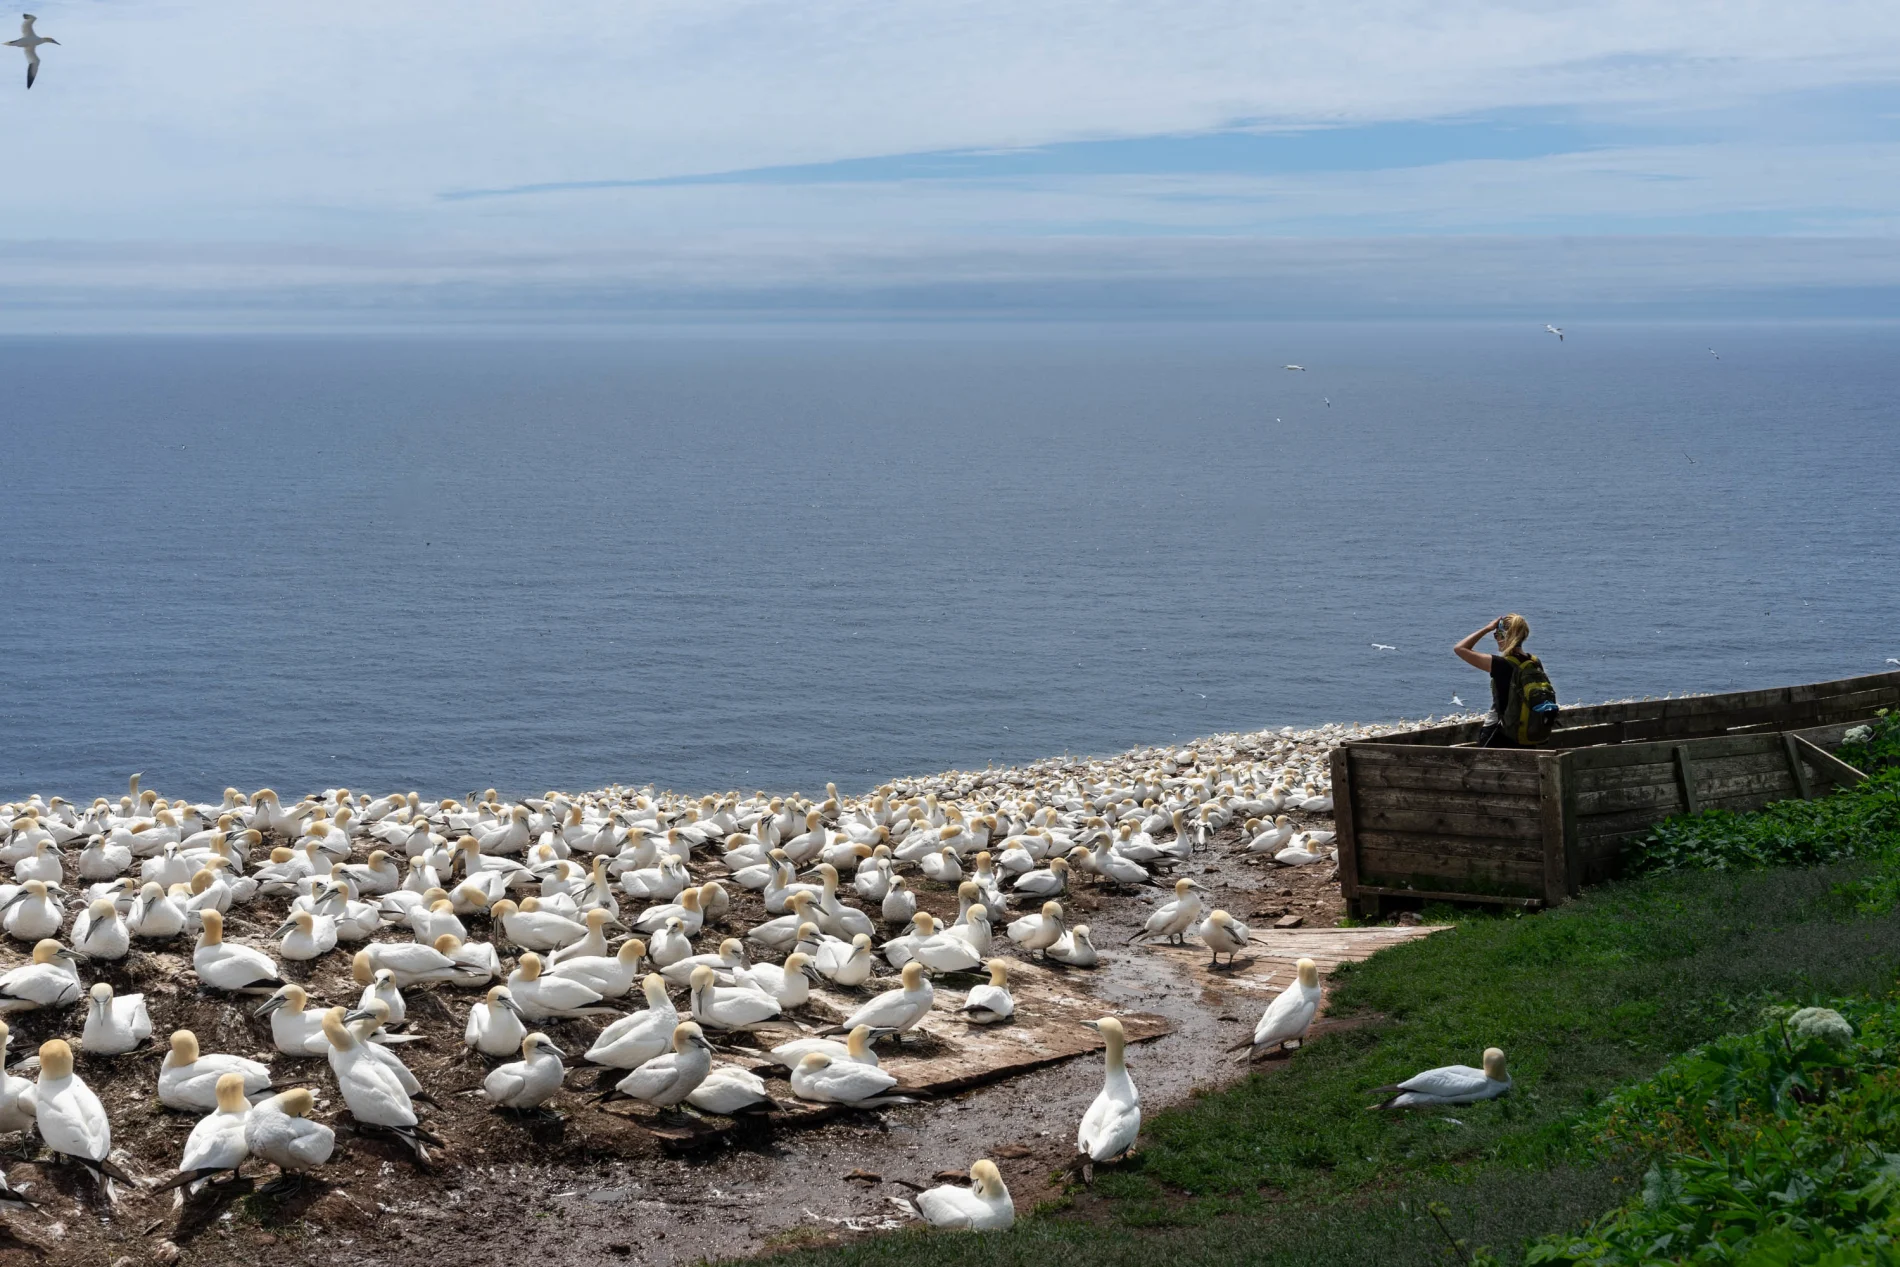 A person observing the ocean next to a flock of northen gannets on the shore.